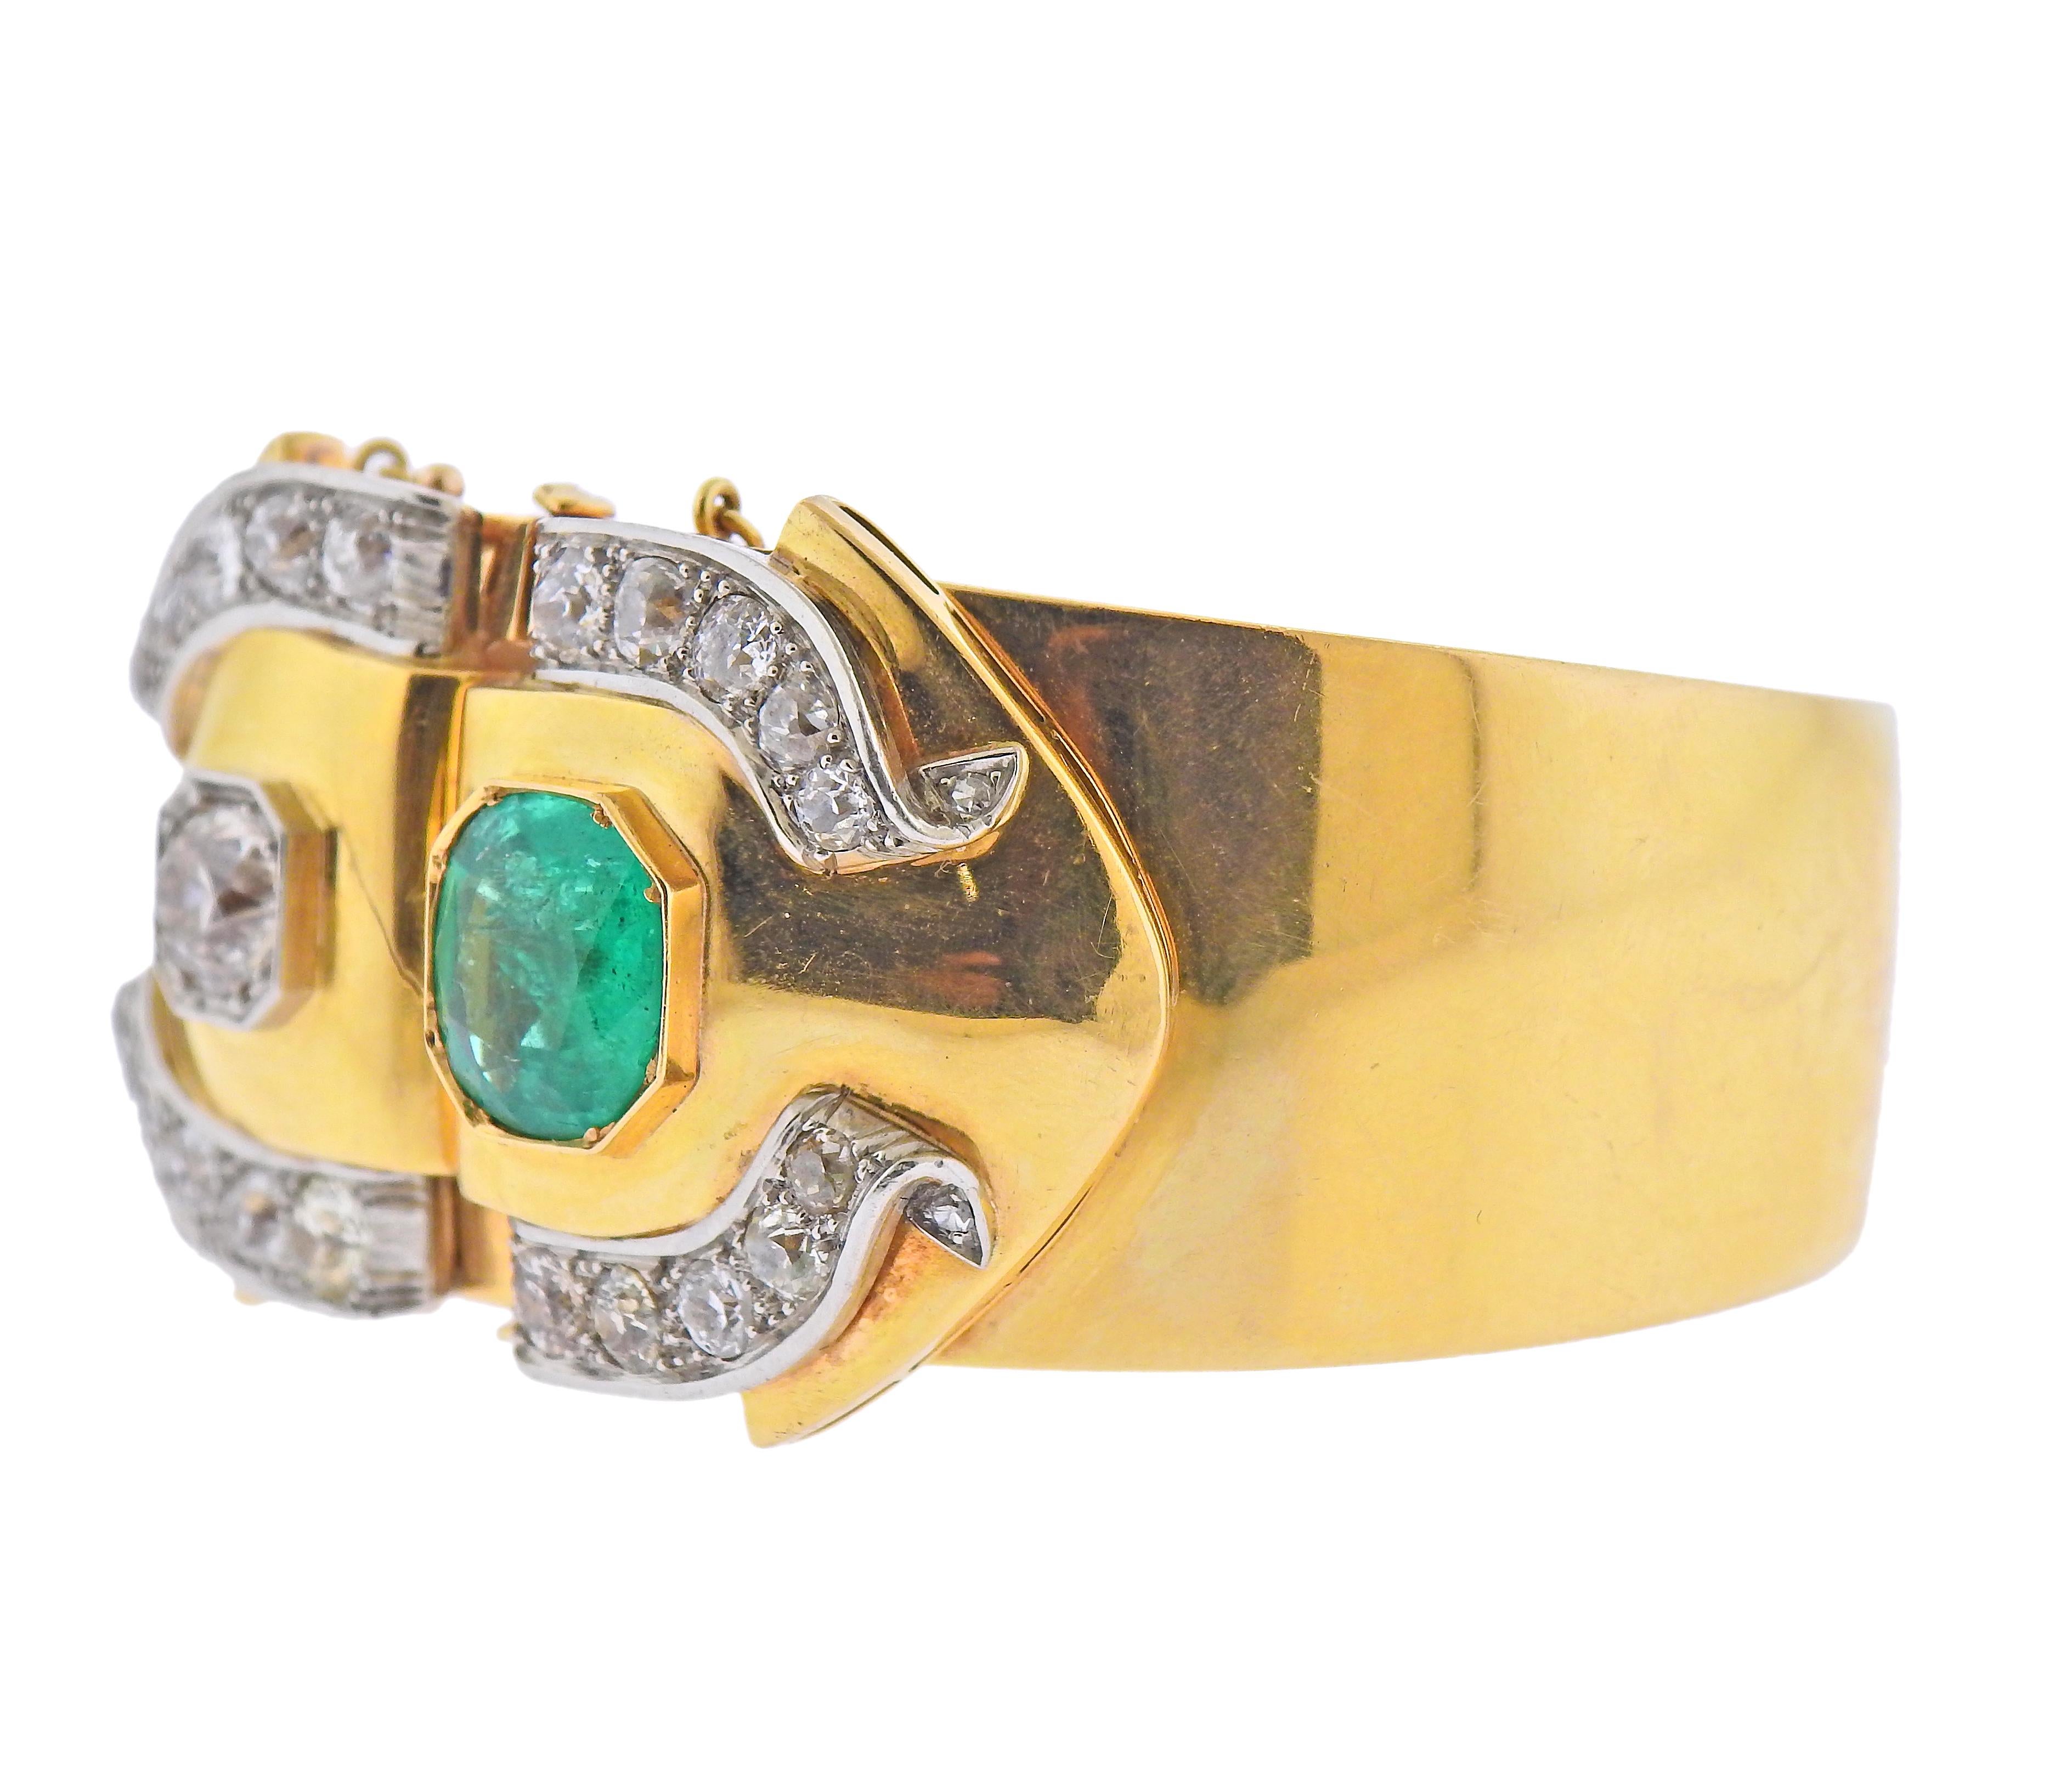 Antique 18k gold bangle bracelet, adorned with approx.  ( 5.50-6.00ctw in old mine cut diamonds ( approx. 1.25ct center diamond) and 11mm x 10.3mm emerald. Bracelet will fit up to 7